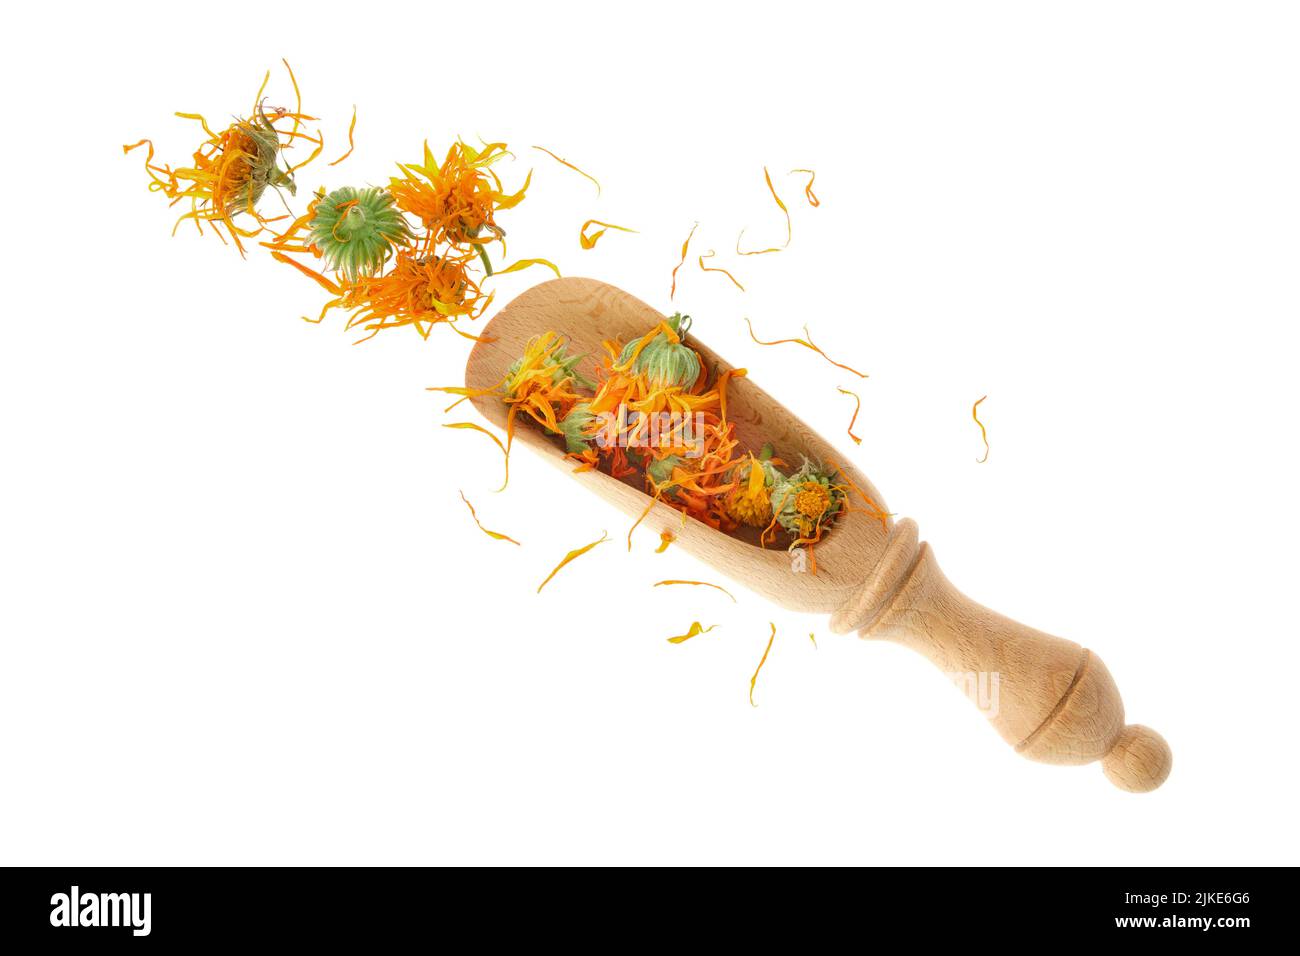 Wooden scoop of dried calendula flowers, isolated on white background. Petals of calendula flowers for making healthy herbal tea. Top view. Stock Photo